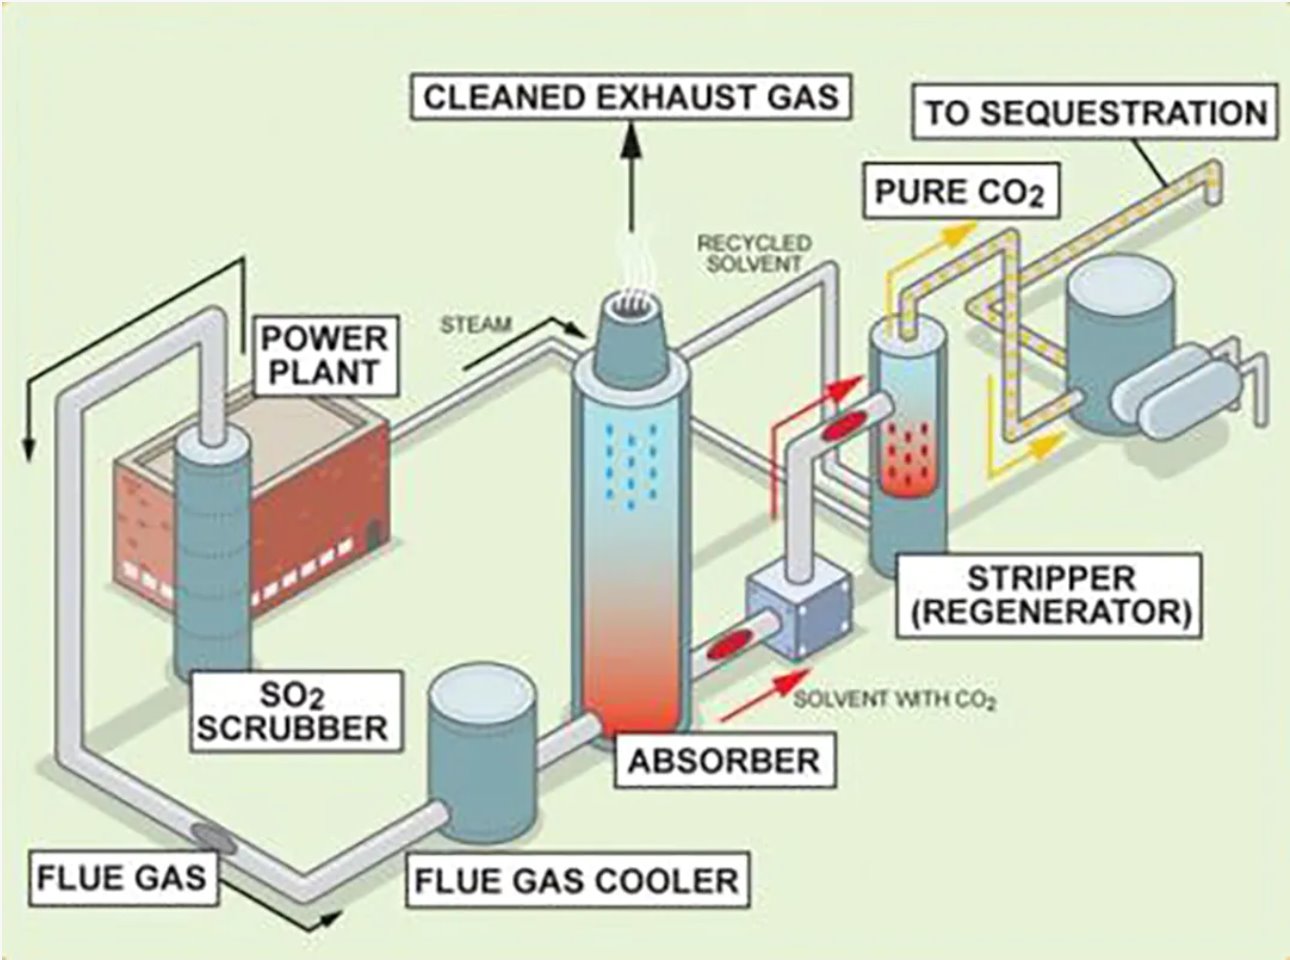 Diagram of a plant with different types of gas

Description automatically generated